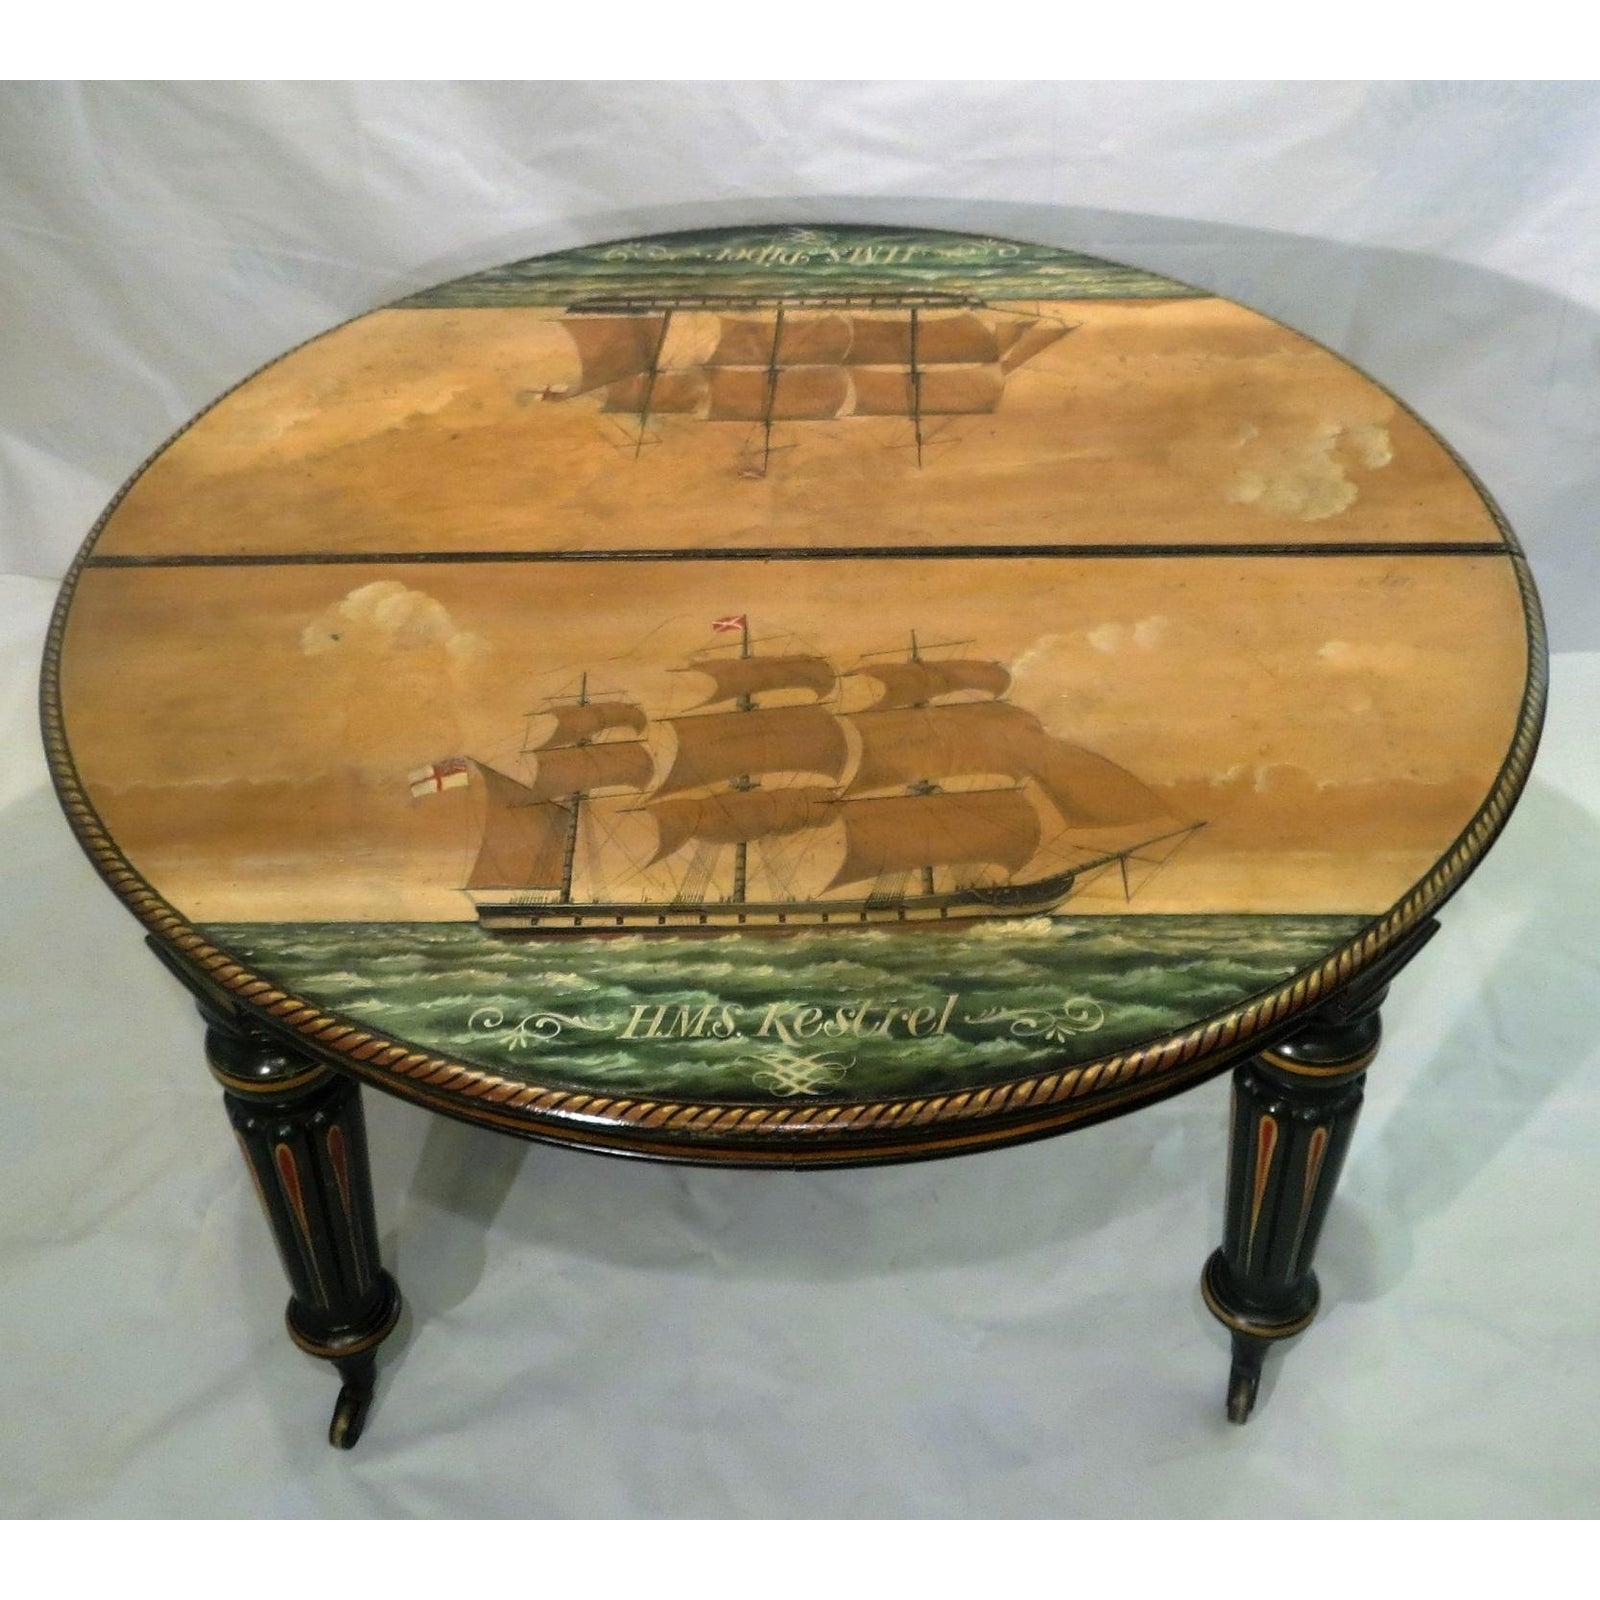 19th Century Antique Regency Period Breakfast Table with Nautical Ship Paintings